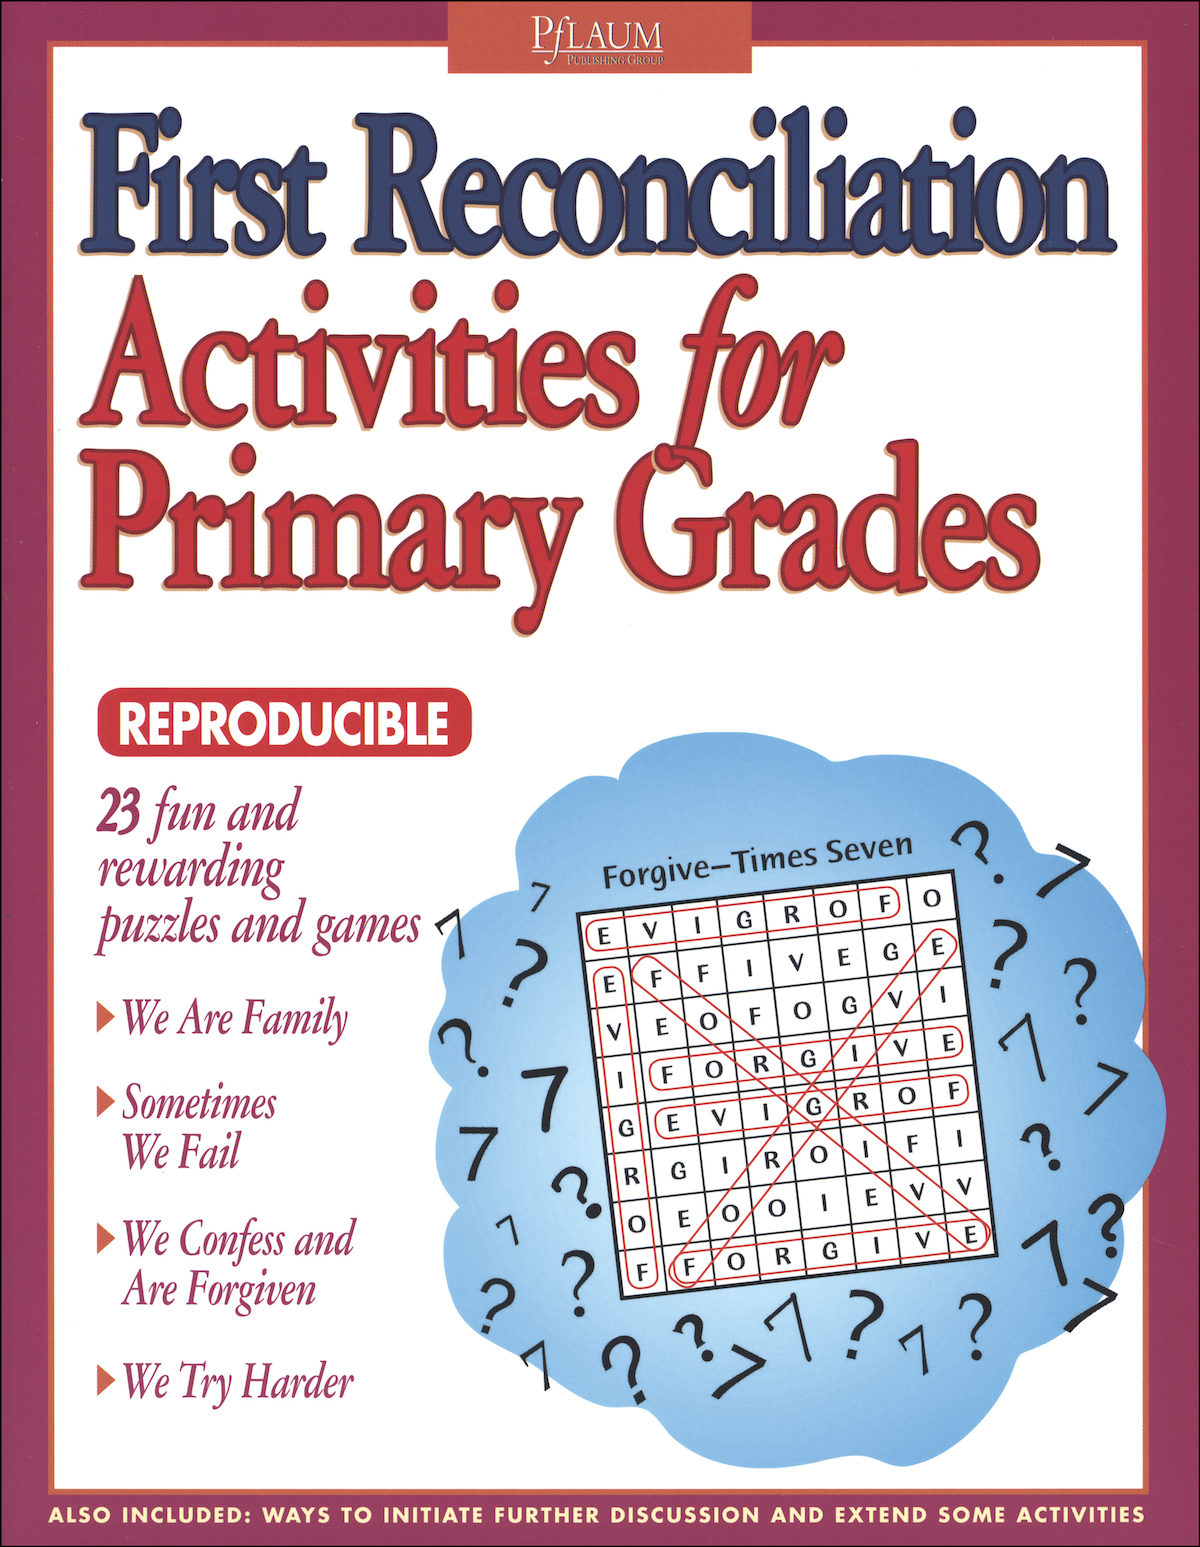 first-reconciliation-activities-for-primary-grades-pflaum-publishin